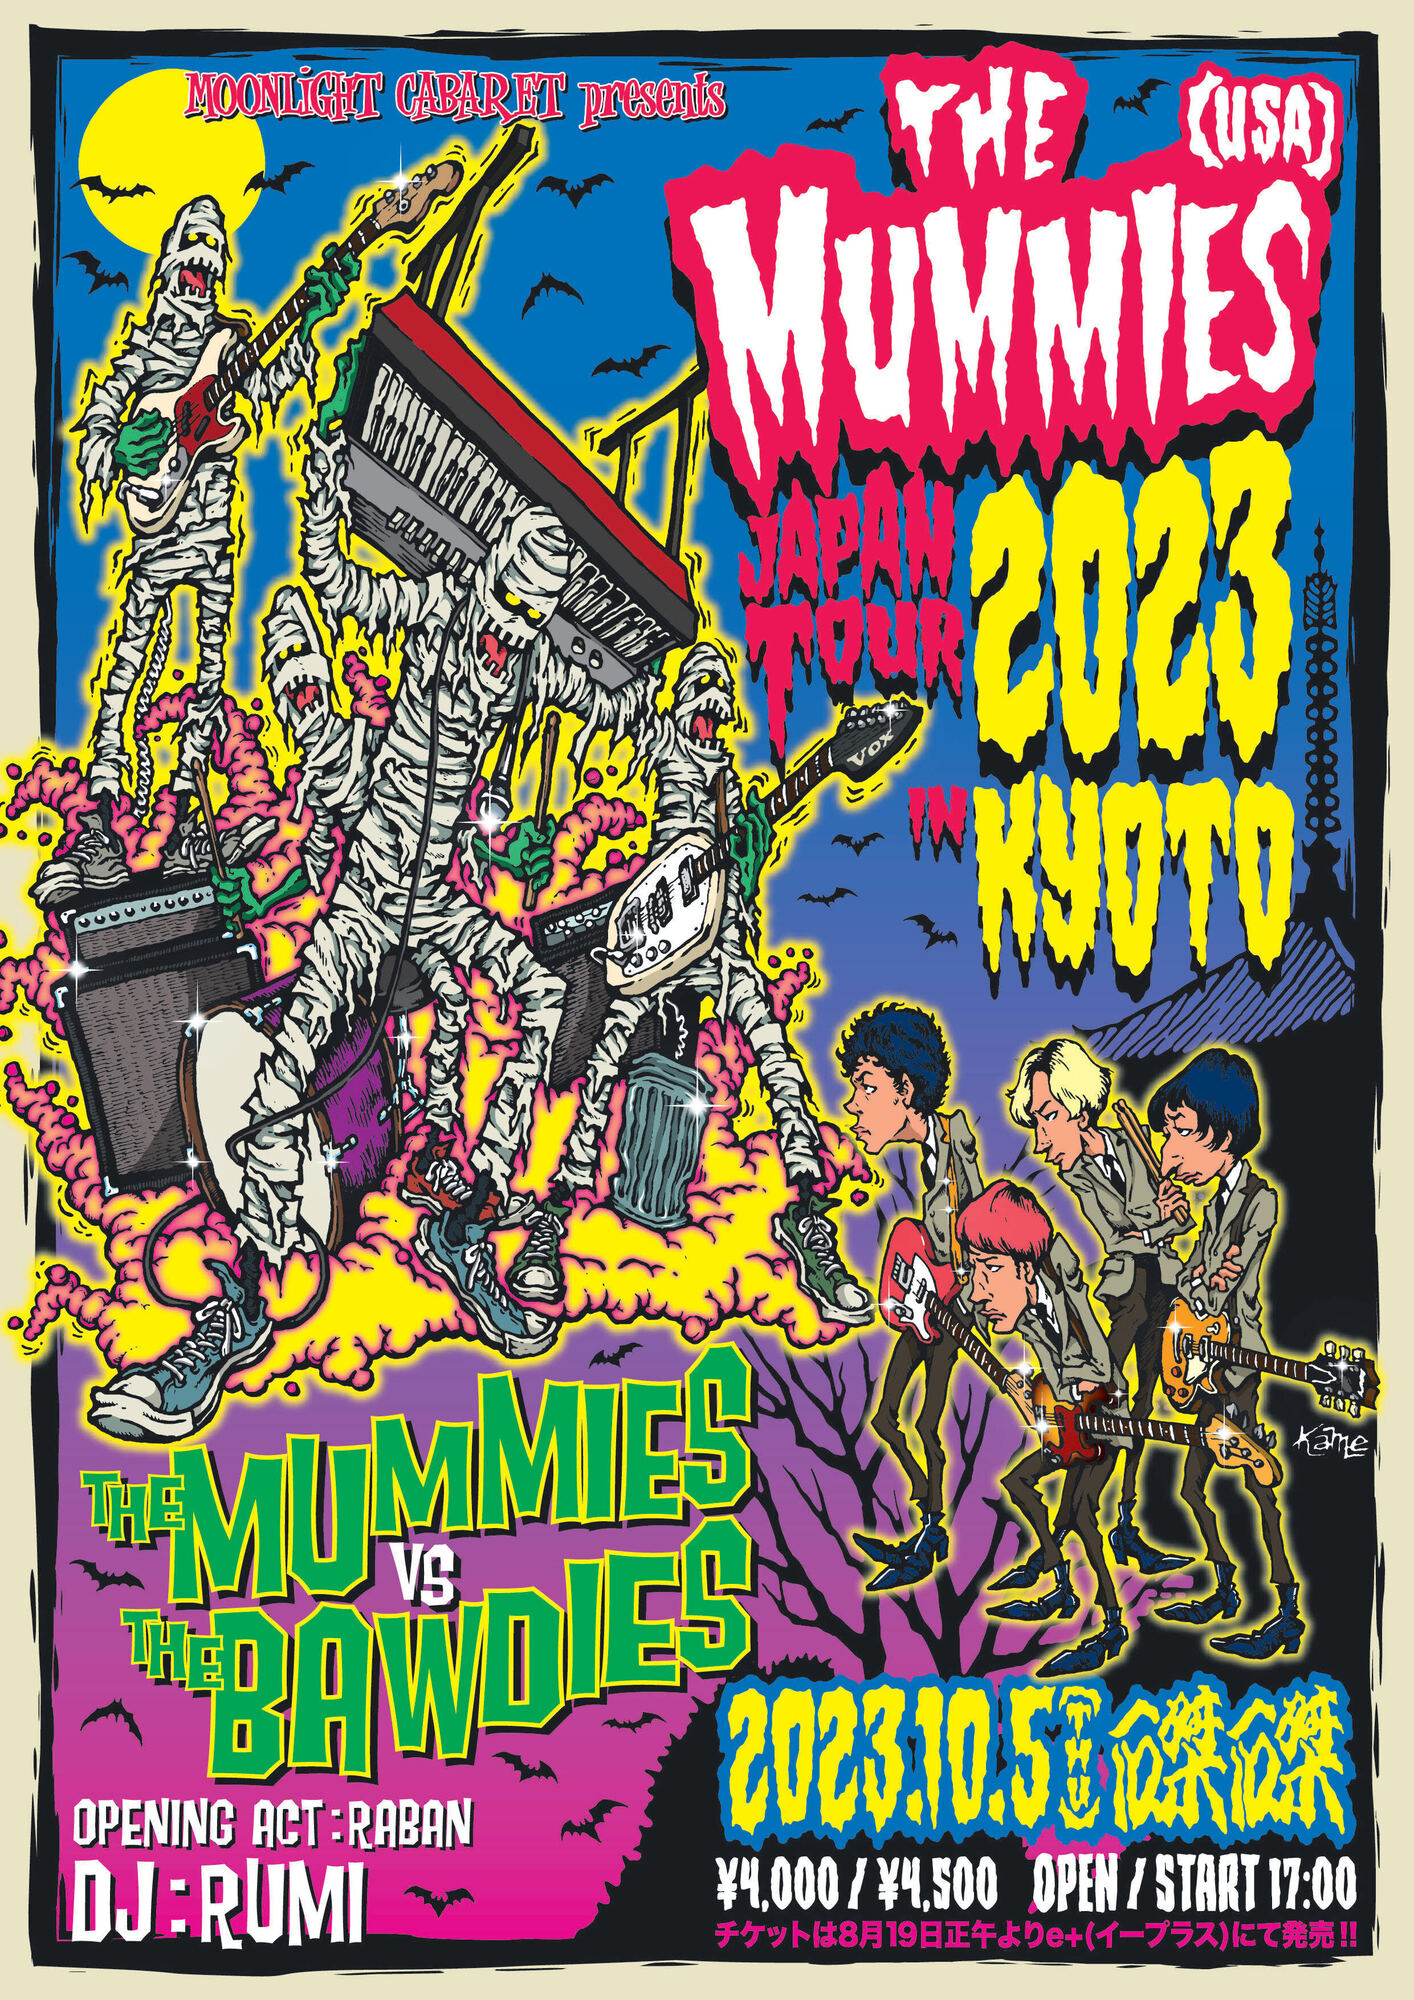 「THE MUMMIES JAPAN TOUR 2023 in KYOTO」への出演が決定！